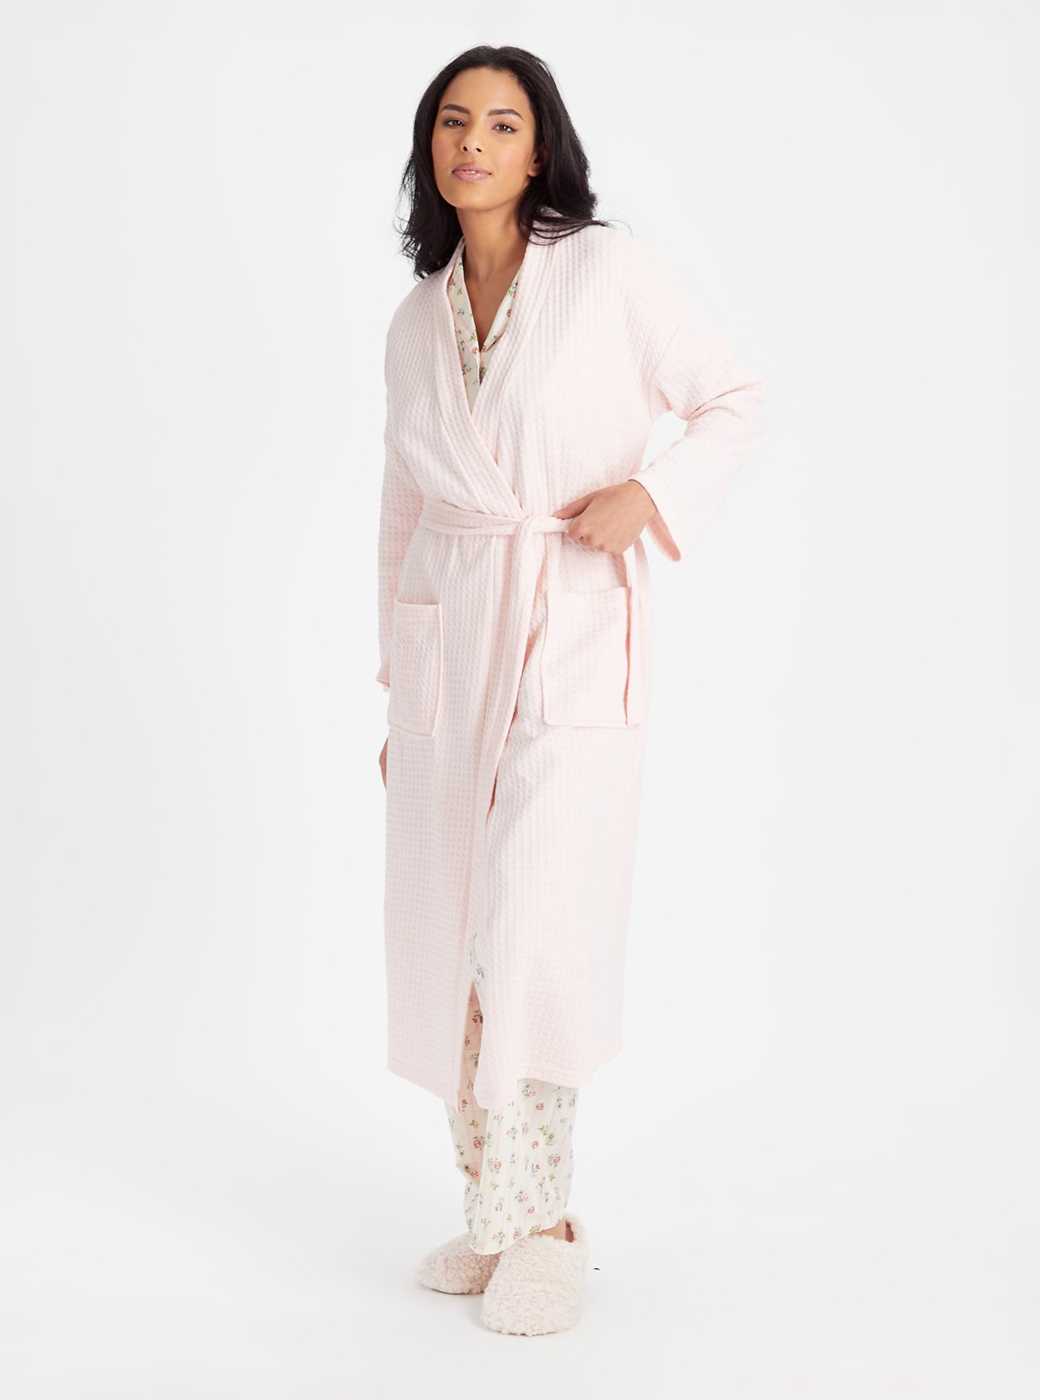 Shop dressing gowns.